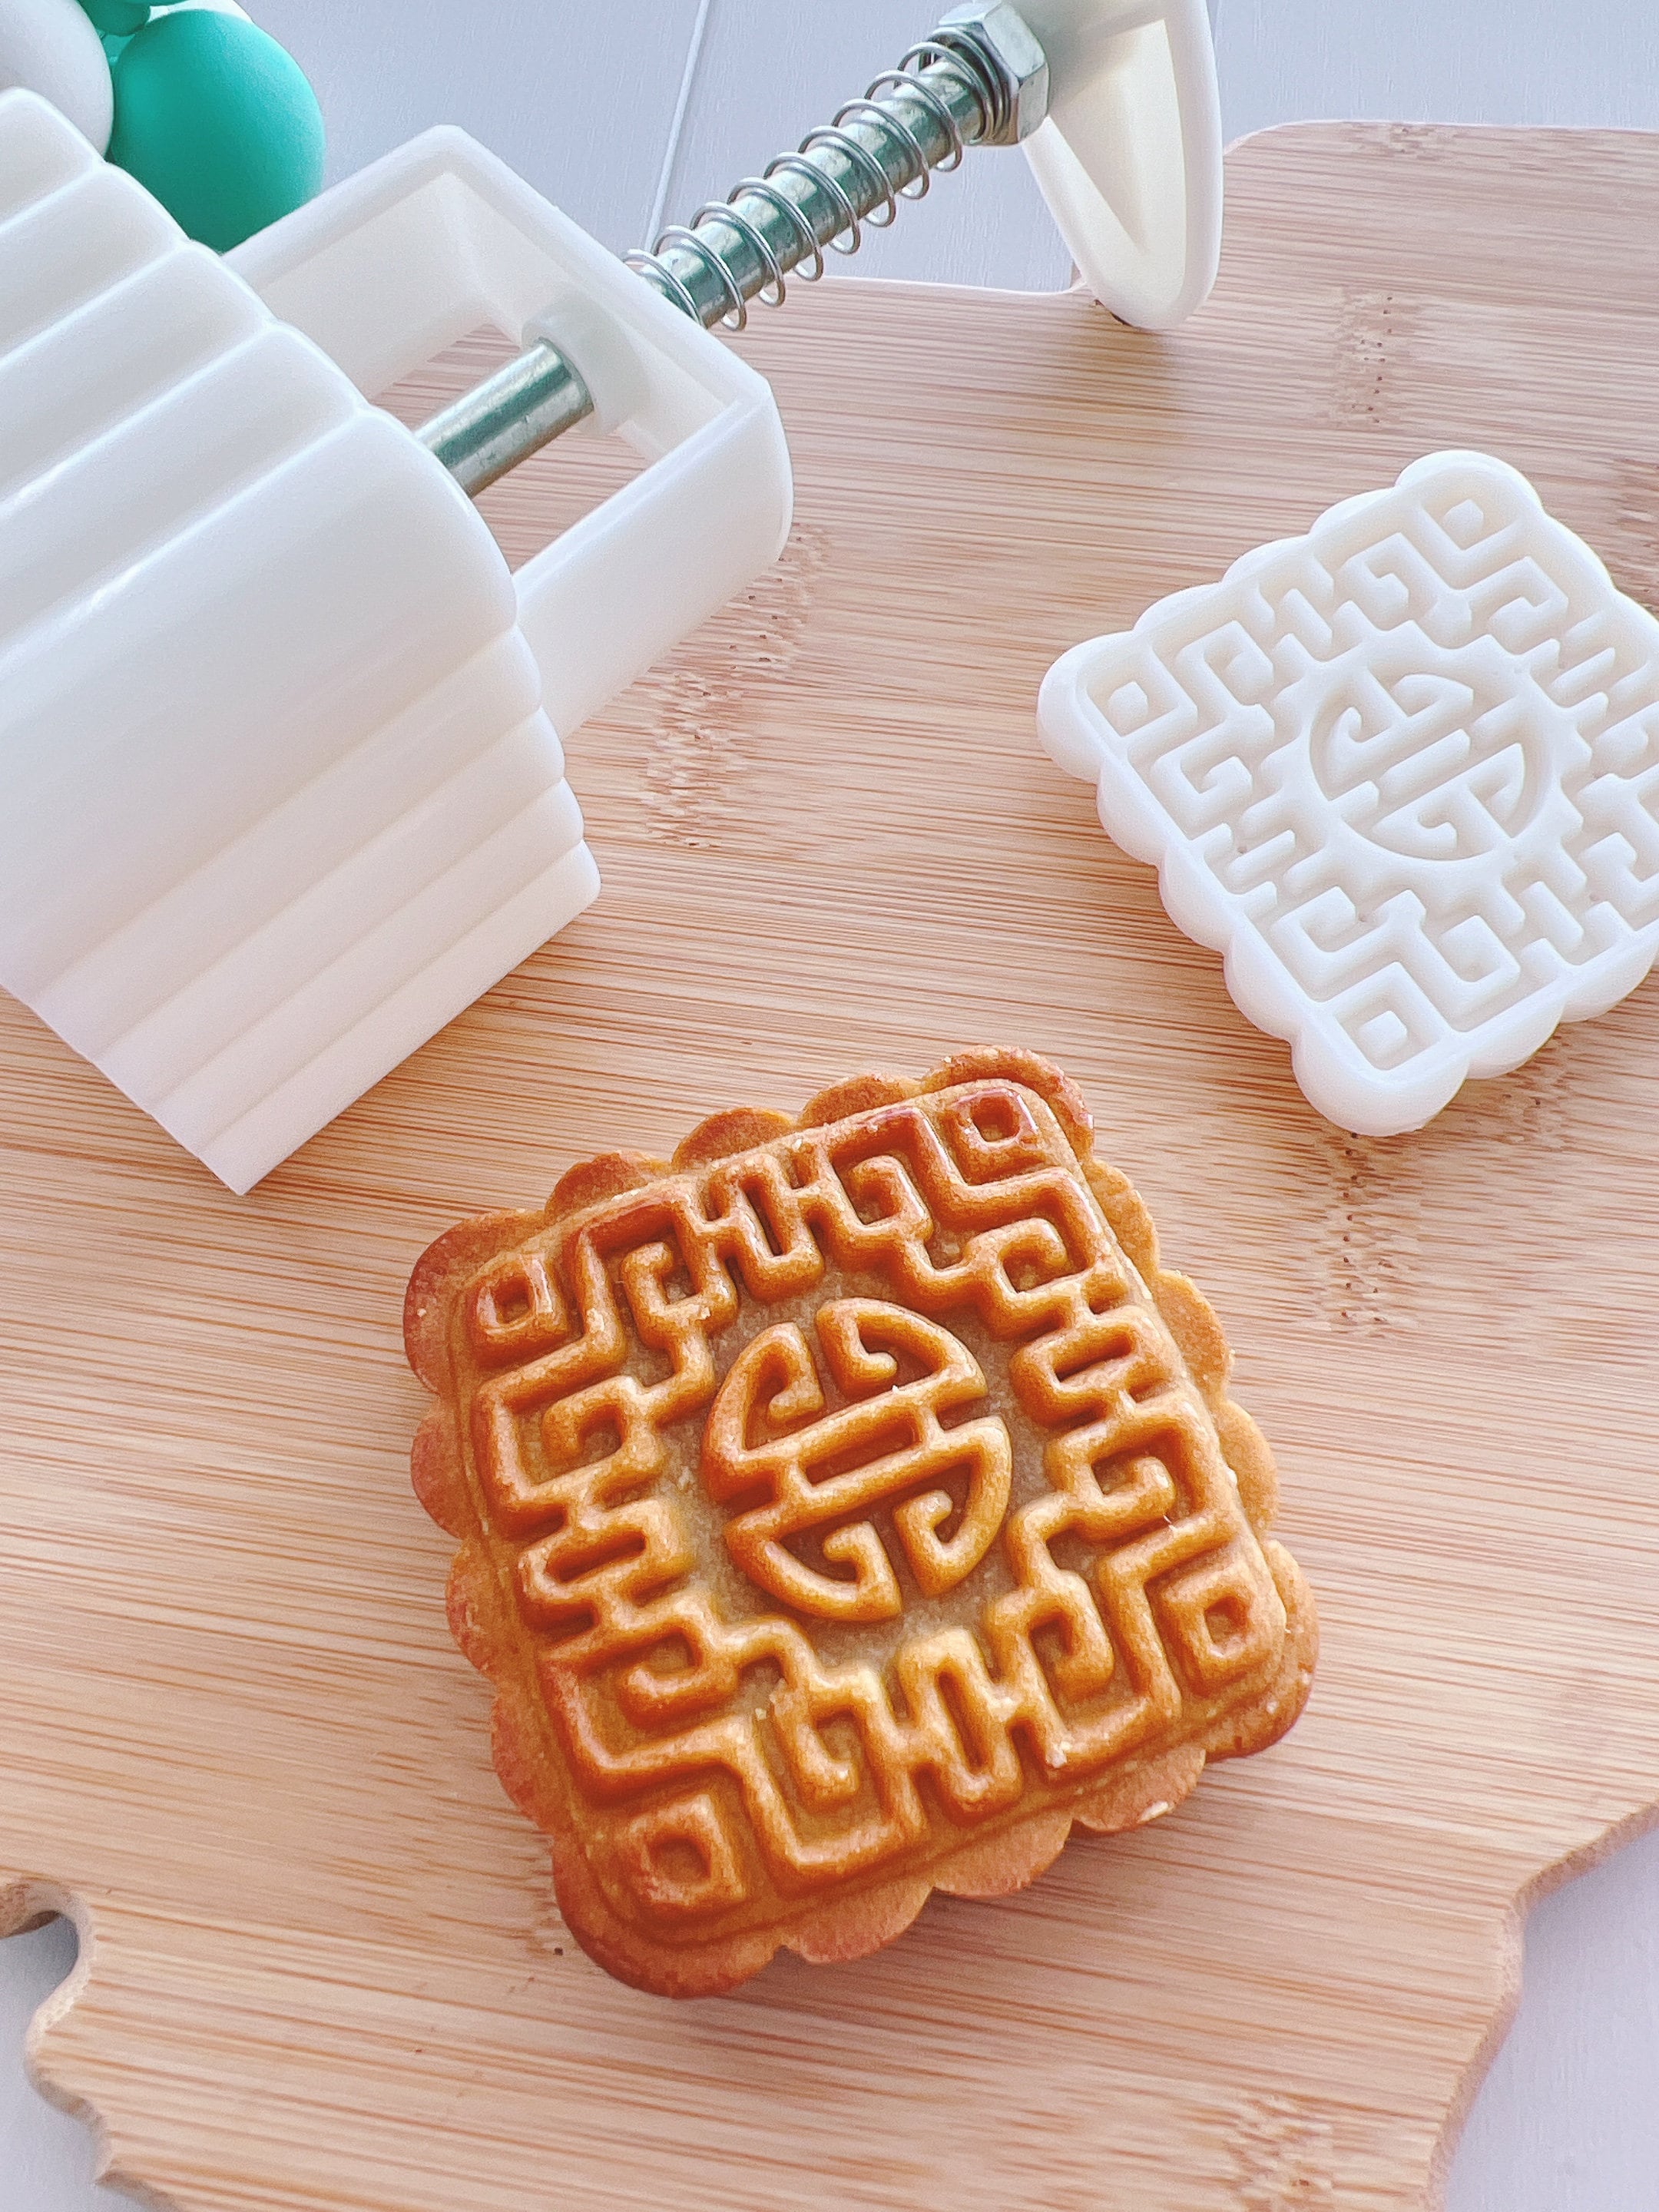 Traditional Asian Chinese Mooncakes filling with Mooncake Paste and Salted Egg Yolk 亚洲中国传统手工月饼